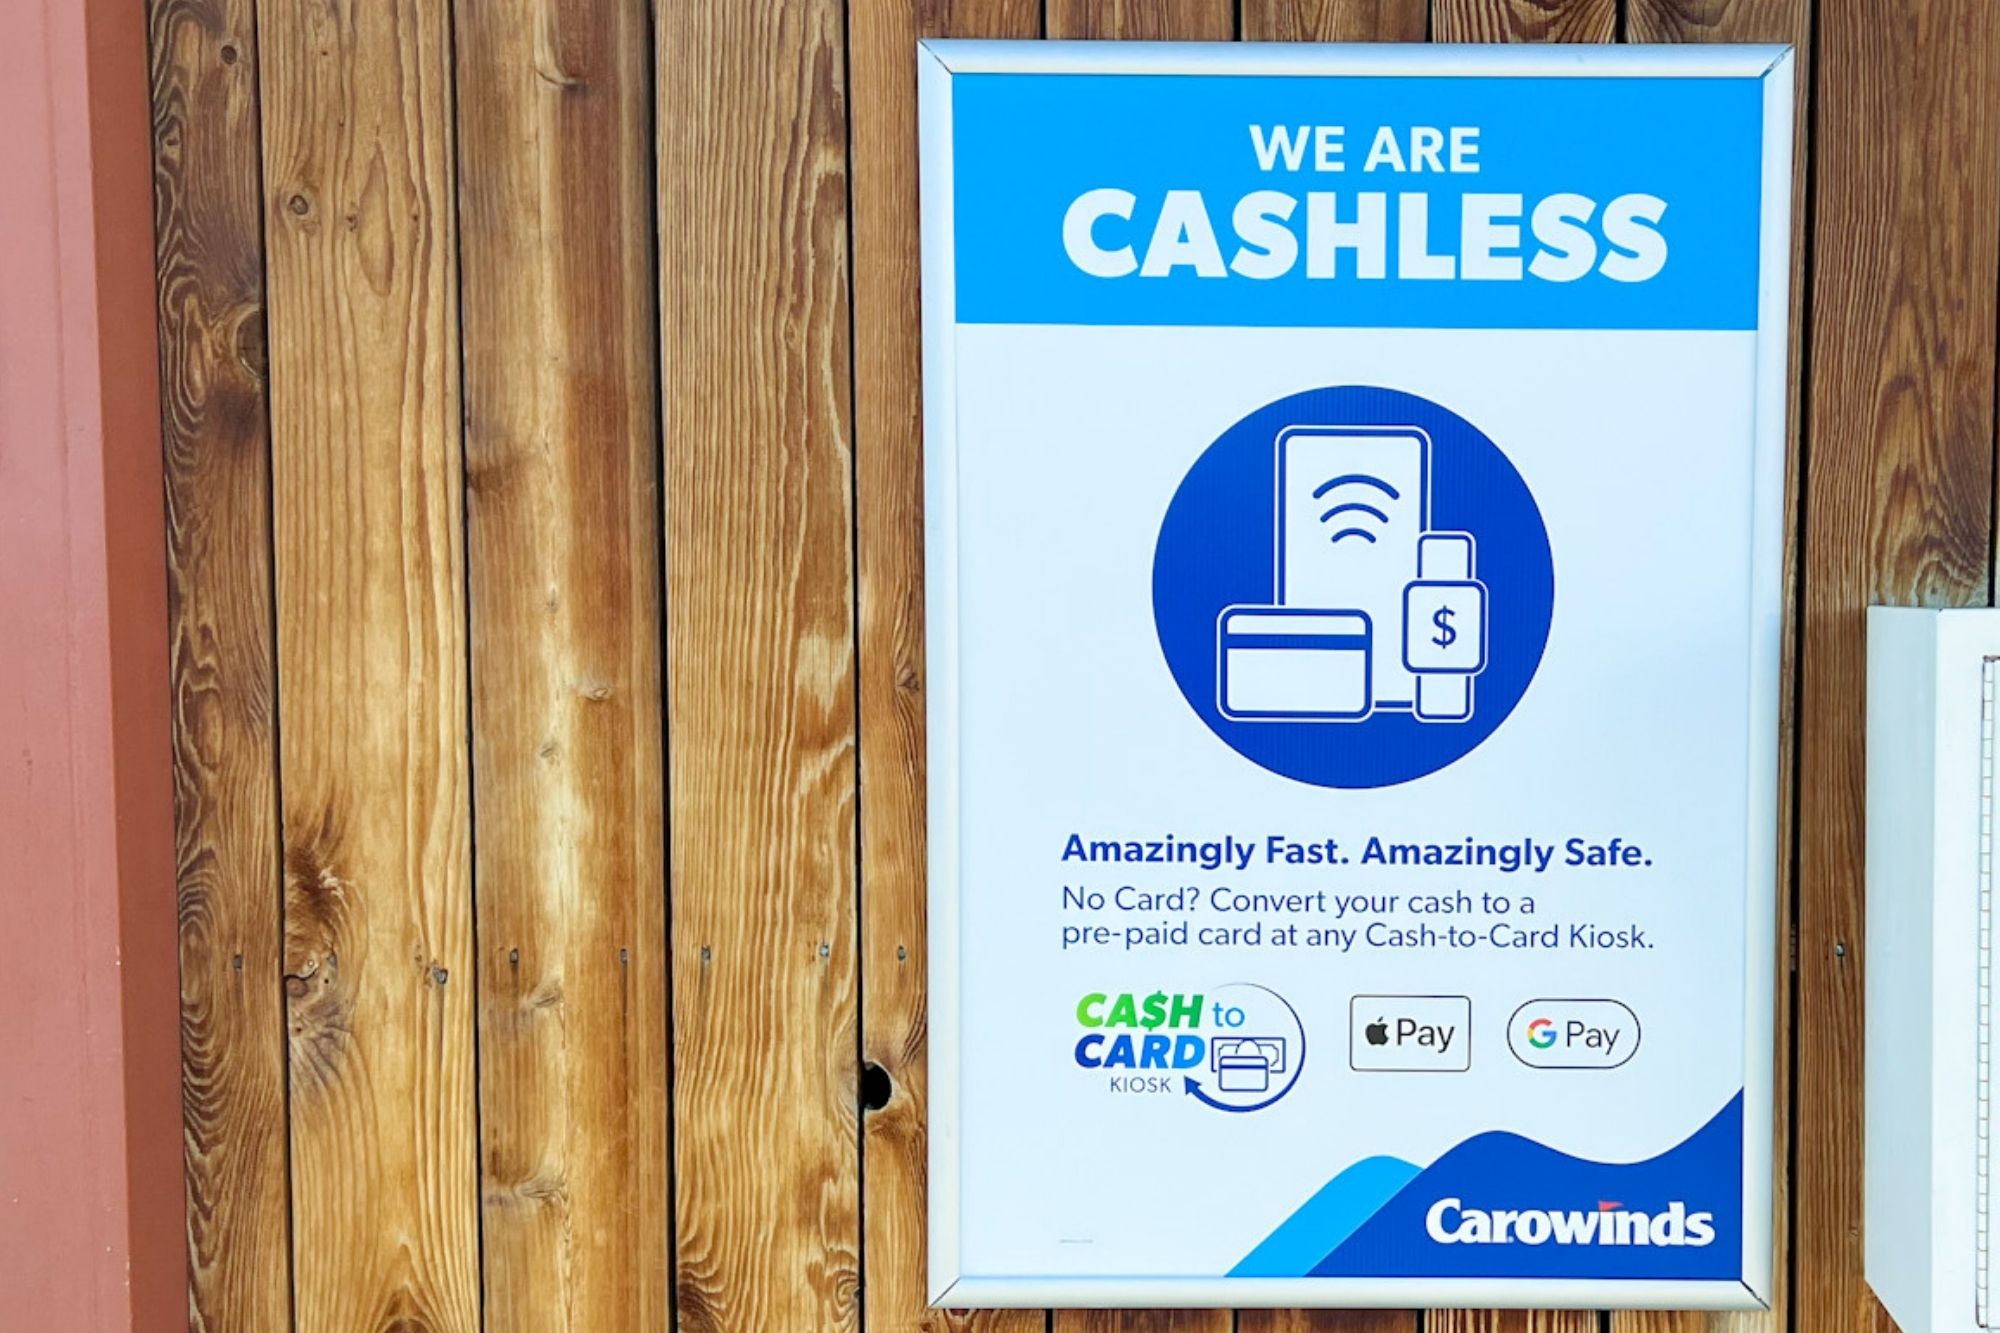 A sign announcing that Carowinds is cashless